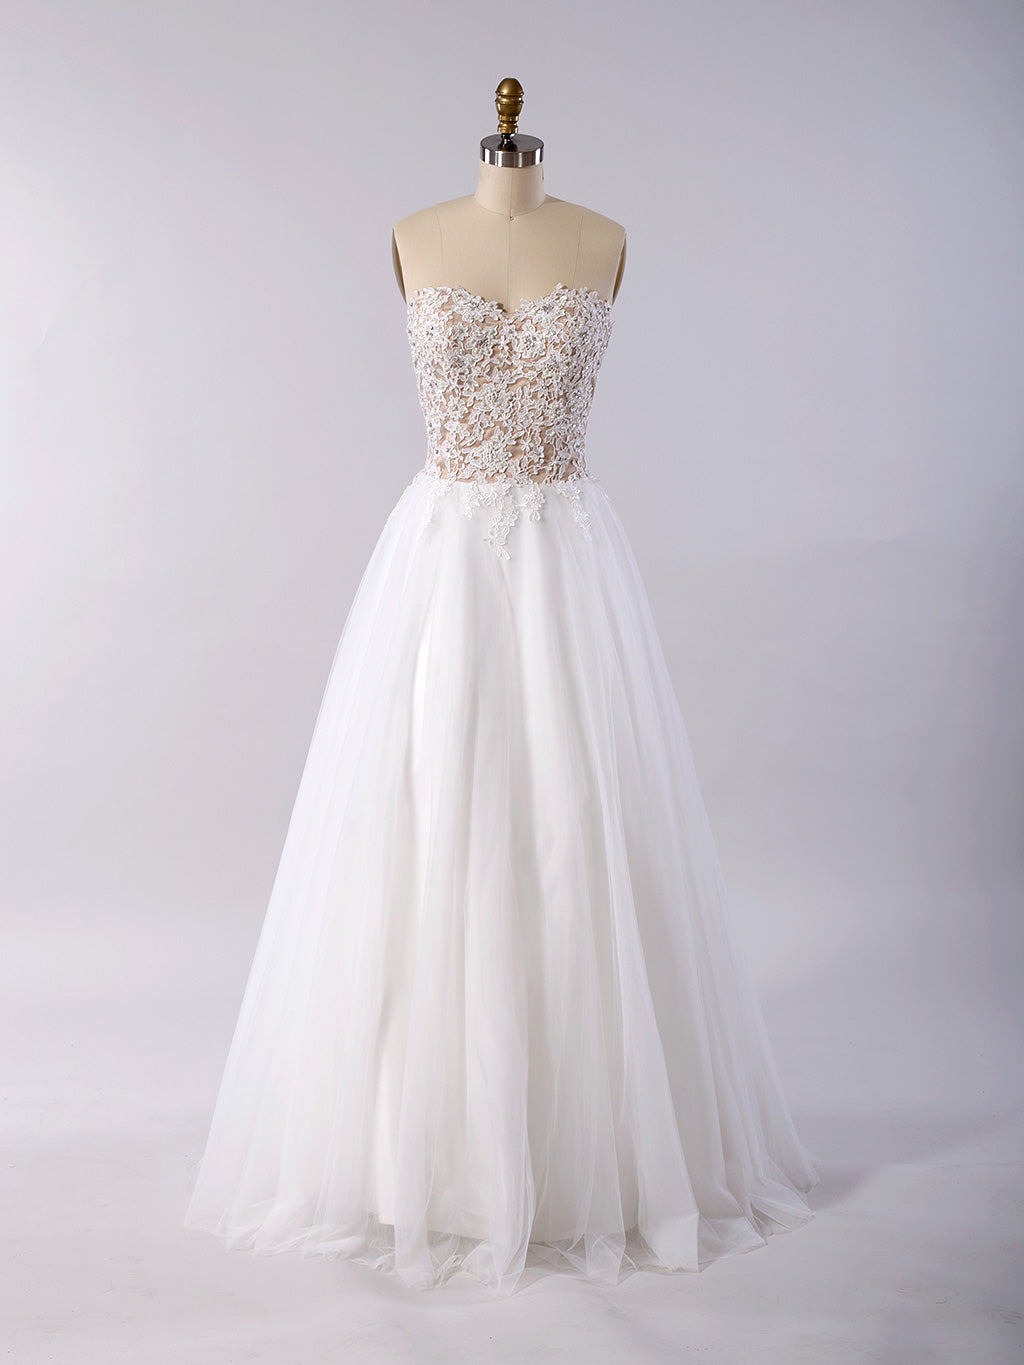 Strapless lace wedding dress with tulle skirt 4033